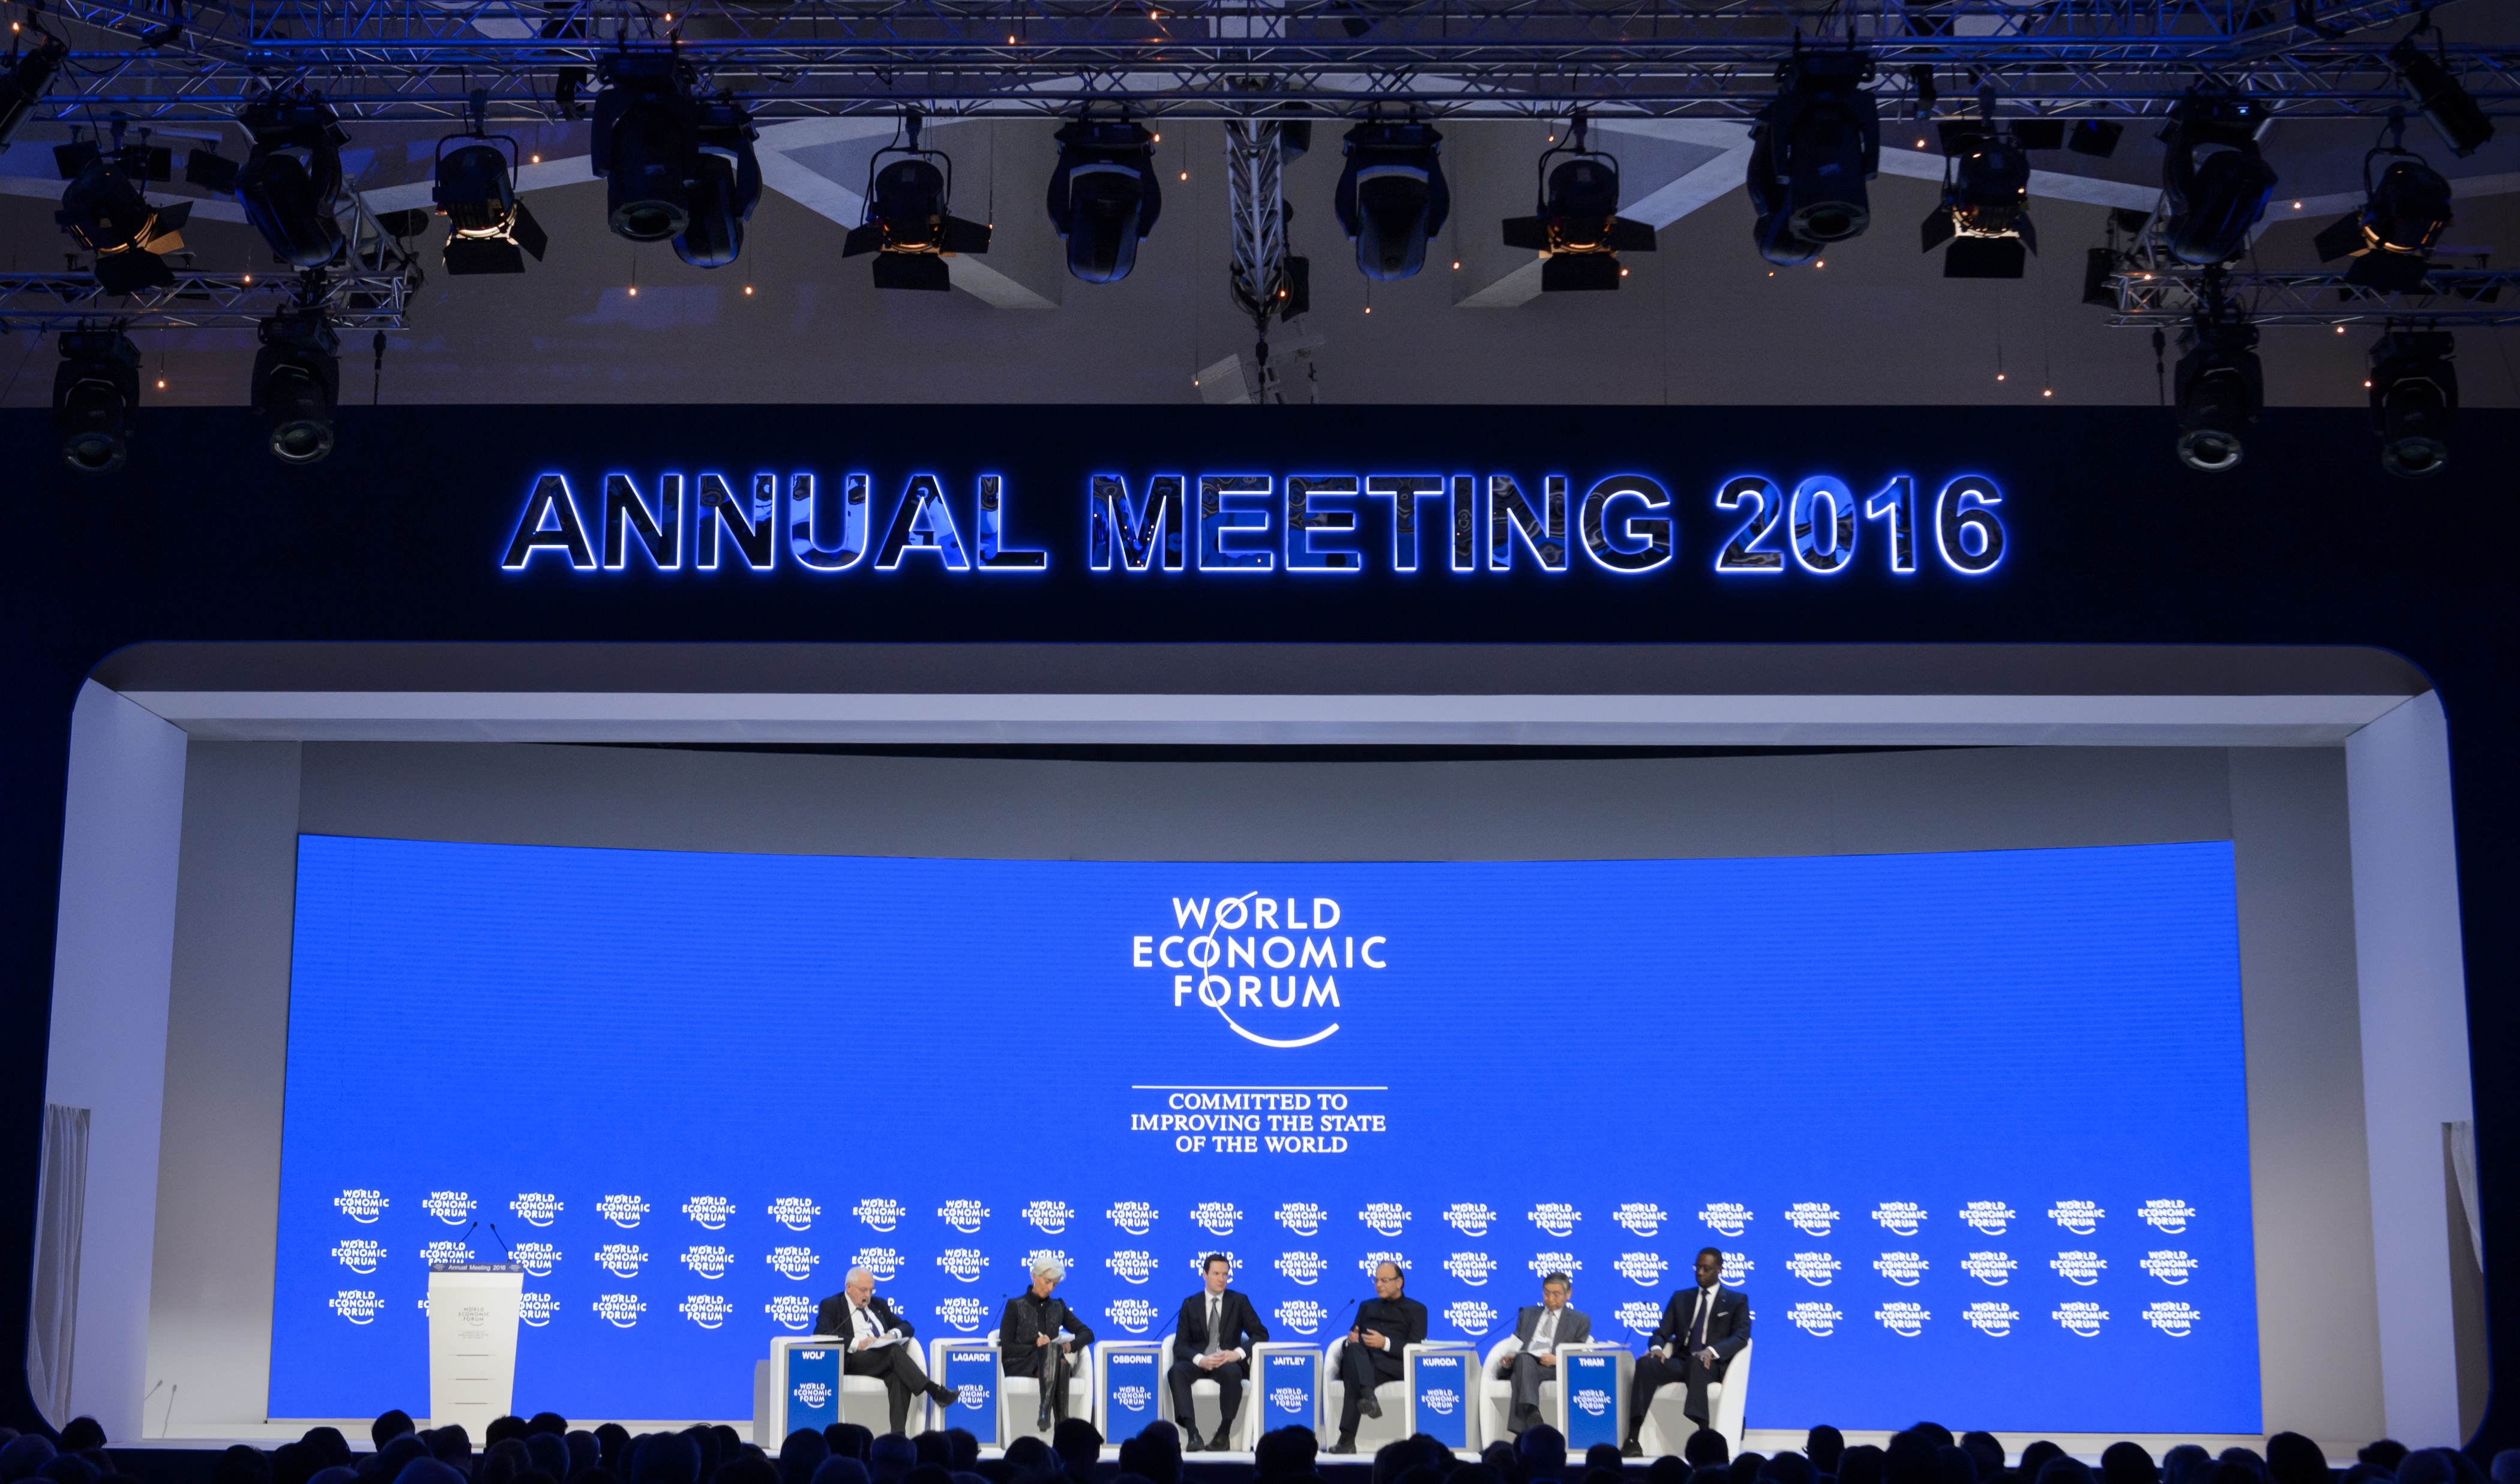 (From L) Journalist Martin Wolf, International Monetary Fund (IMF) Managing Director Christine Lagarde, British Finance Minister George Osborne, Indian Finance Minister Arun Jaitley, Governor of the Bank of Japan Haruhiko Kuroda and Ivory Coast-born French Credit Suisse CEO Tidjane Thiam attend a session of the World Economic Forum annual meeting on January 23, 2016 in Davos.